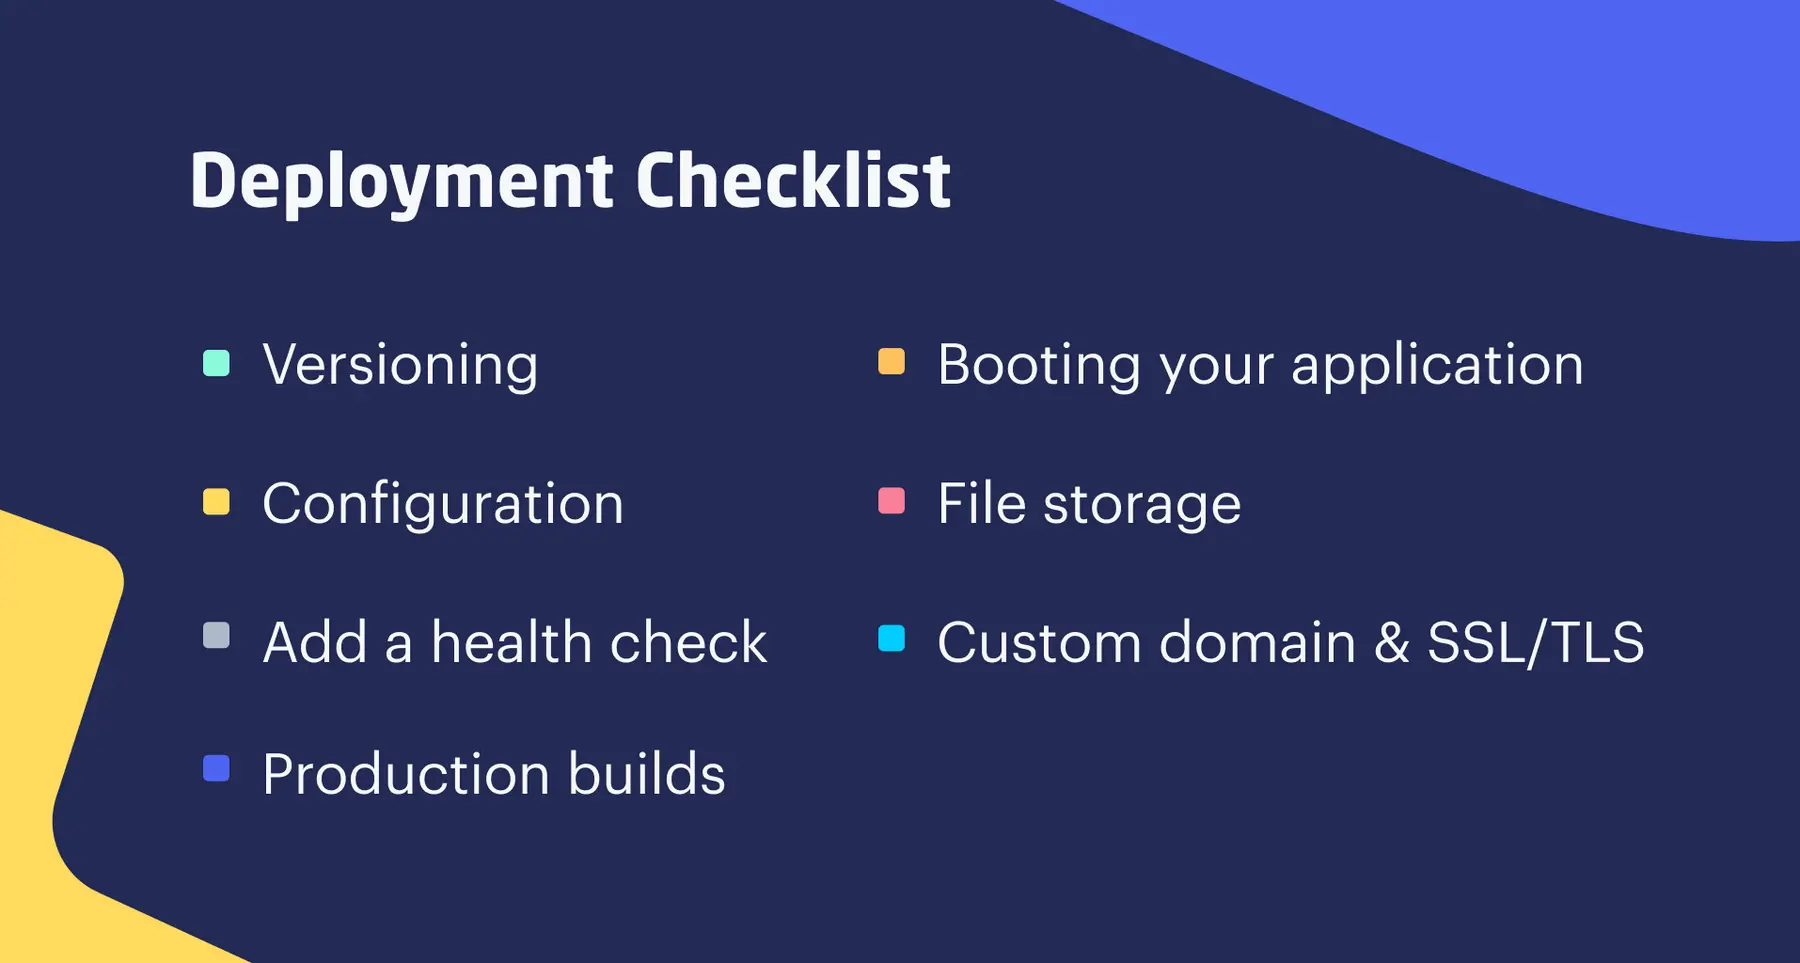 A checklist for troubleshooting your deployment